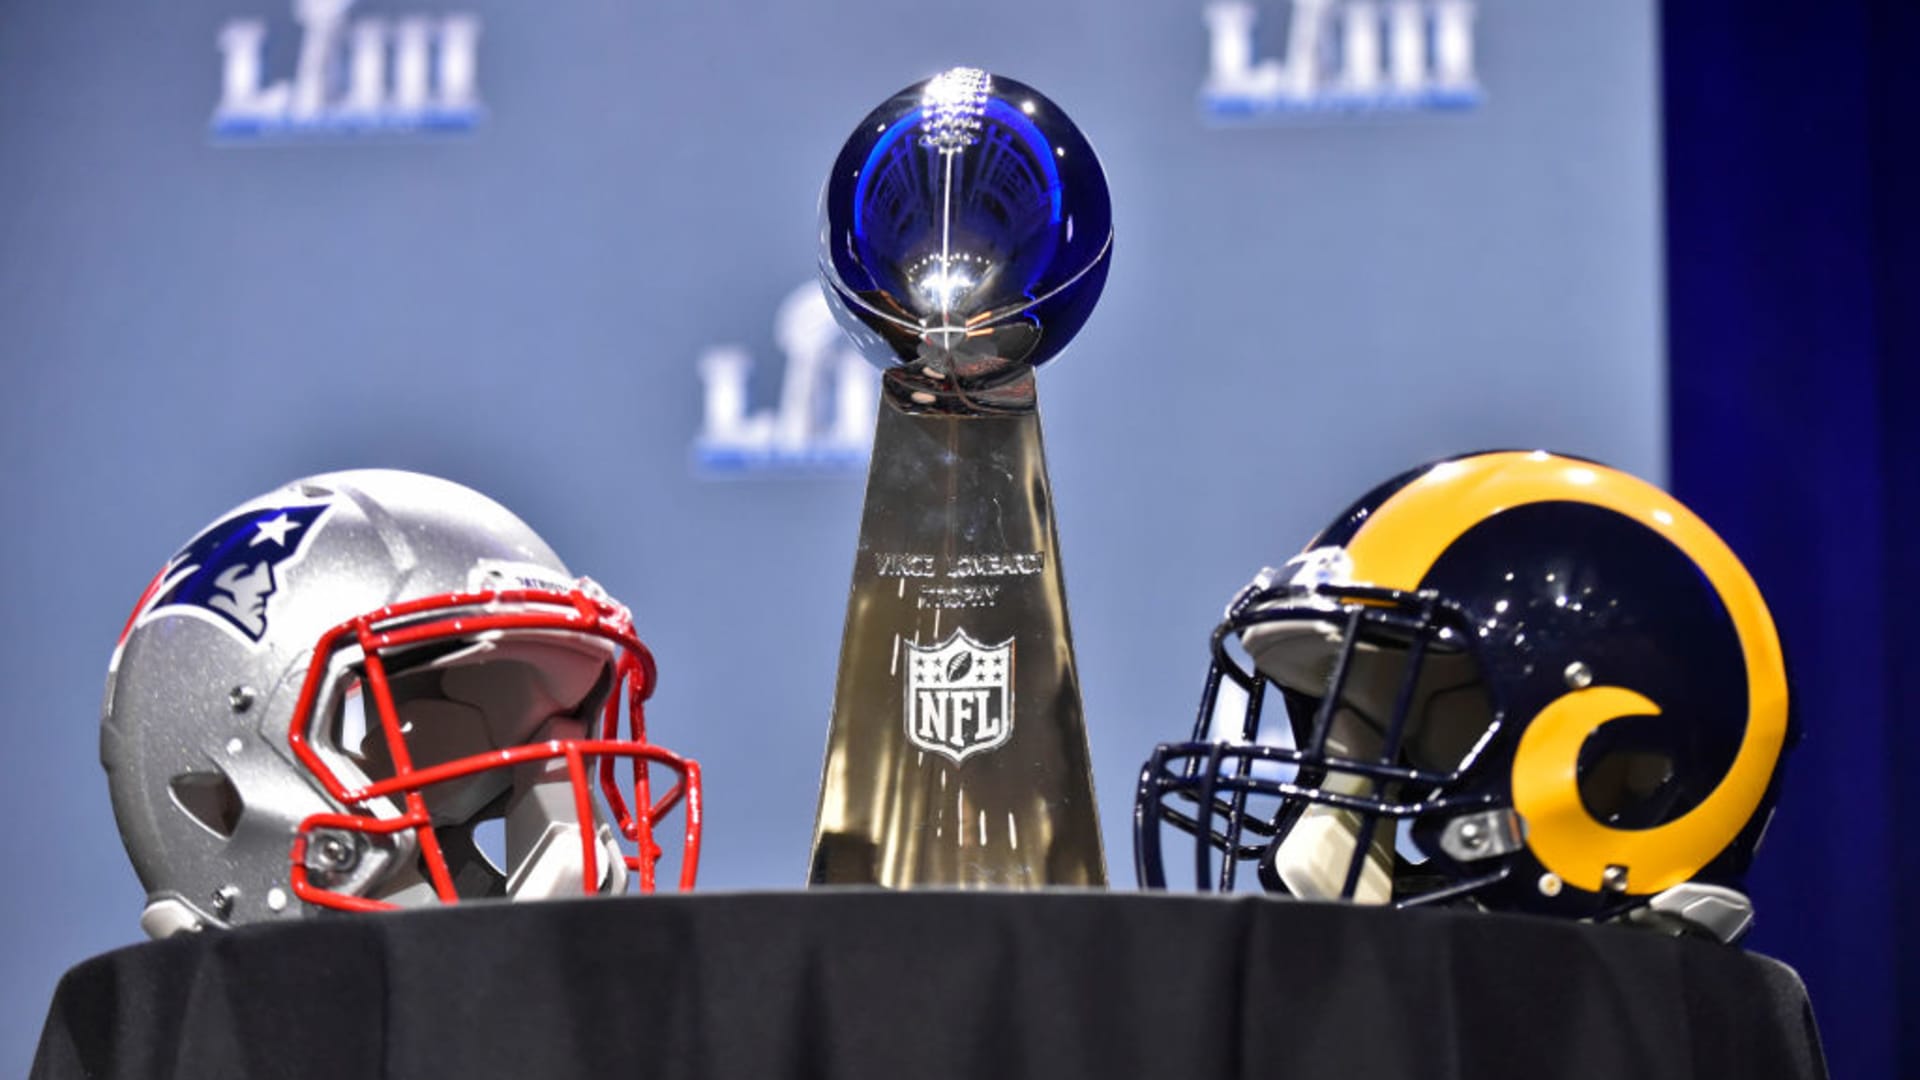 which teams are going to the superbowl this year